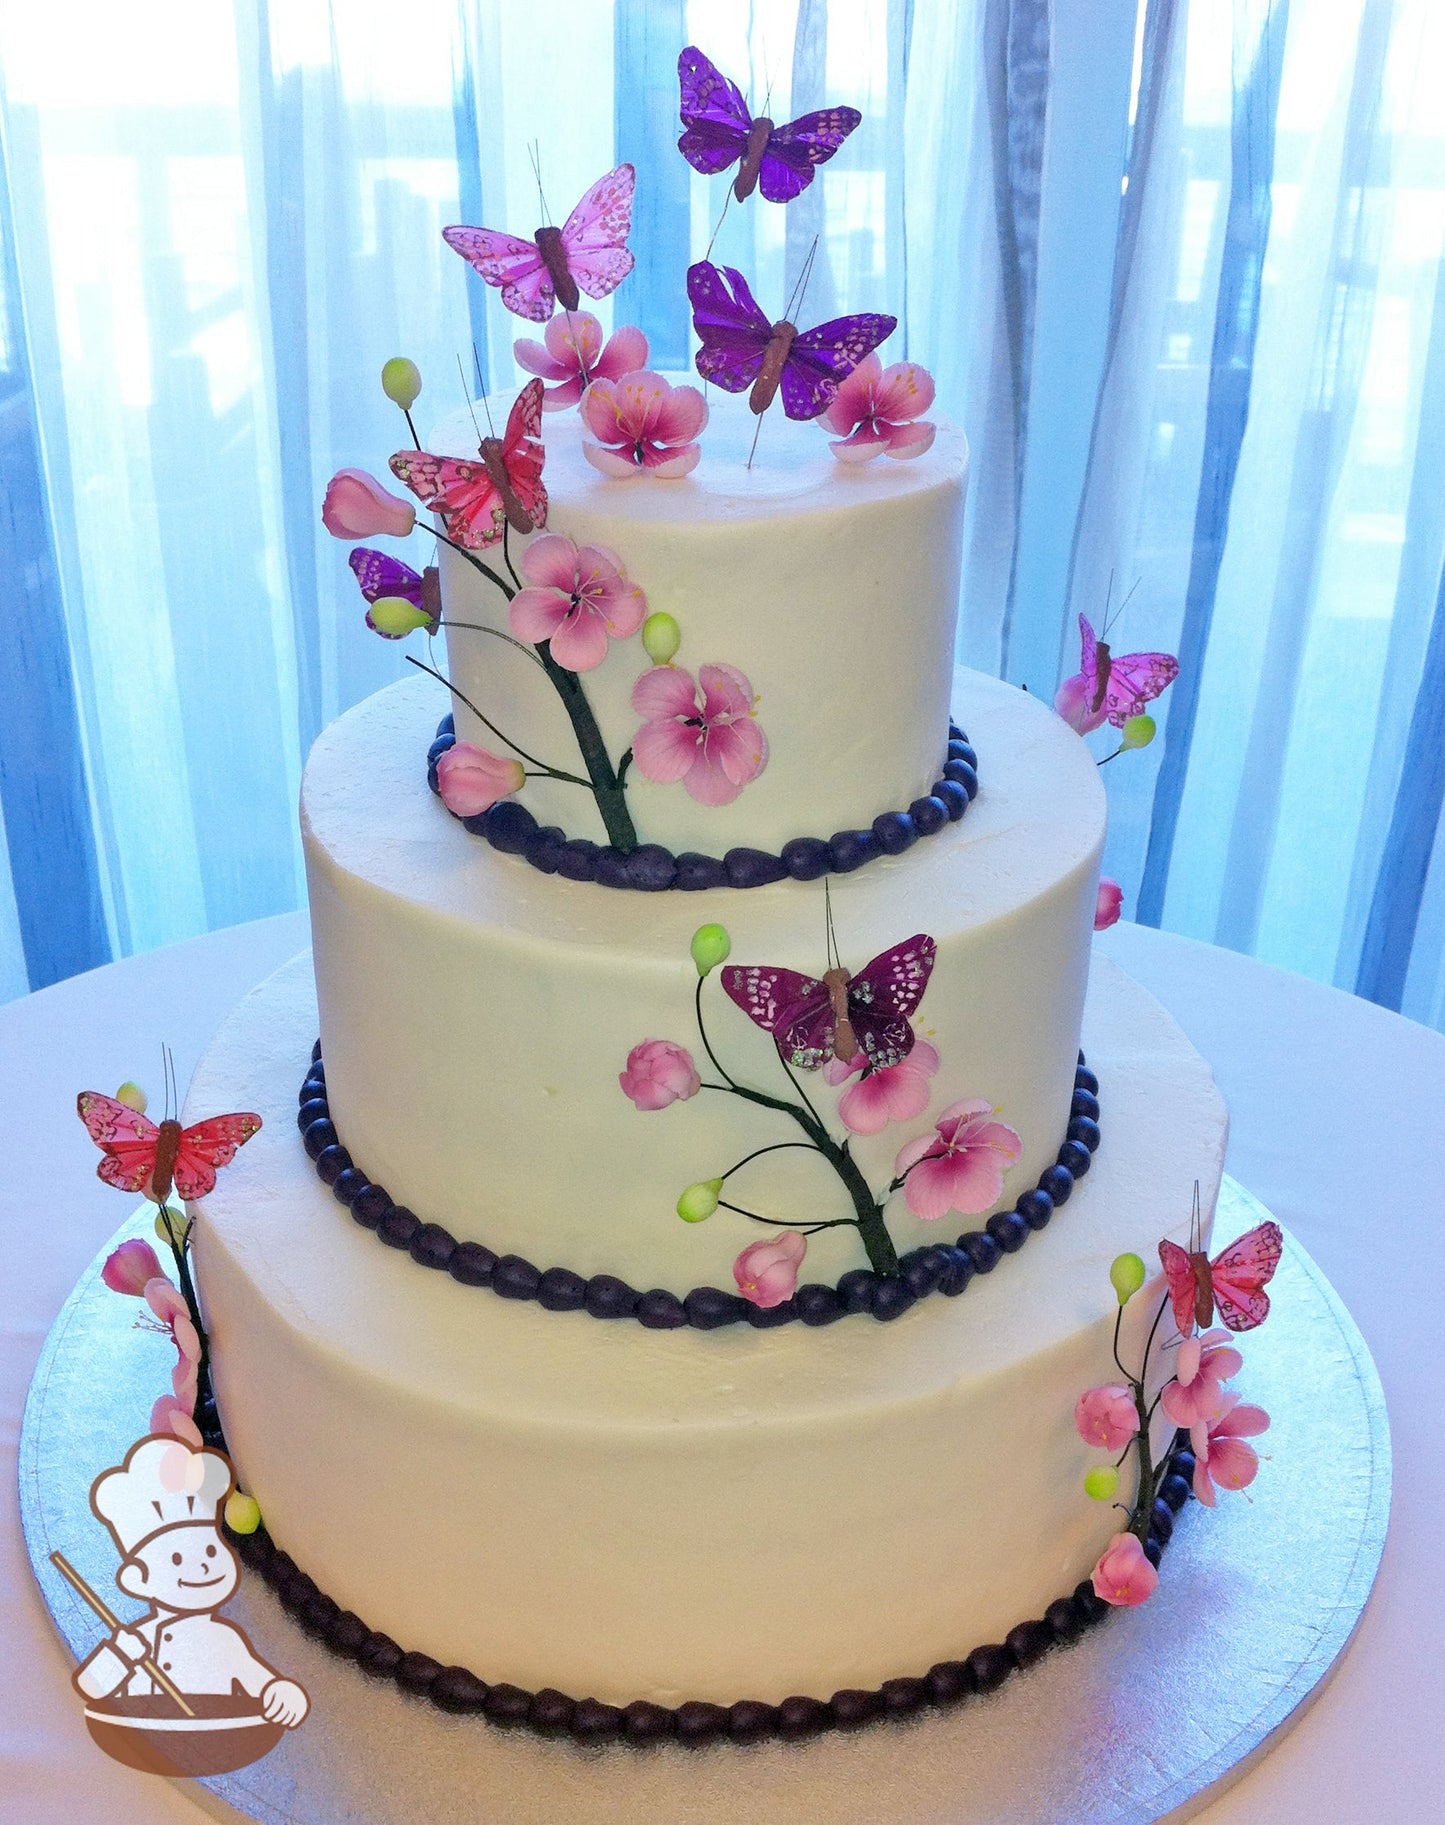 3-tier cake with cherry blossom branches in green and pink. Pink and purple butterflies decorated coming out of the cake.